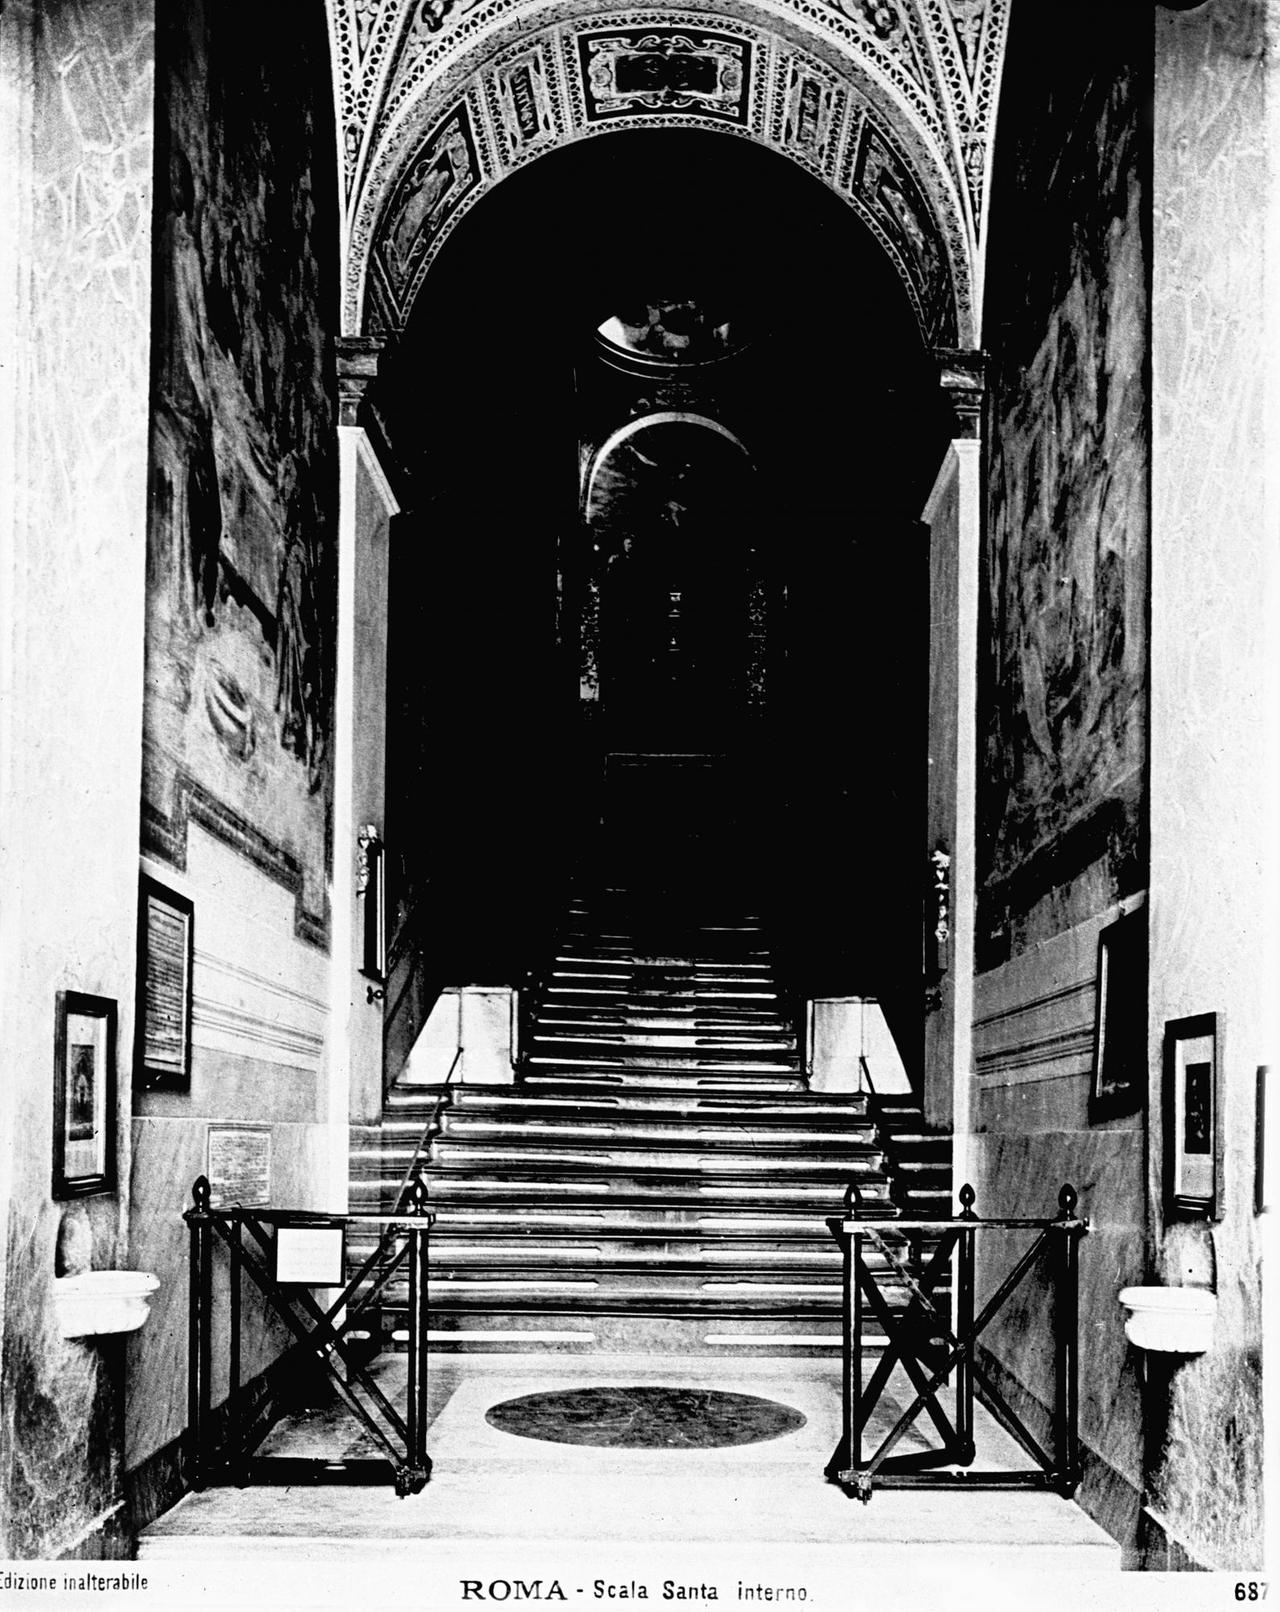 Martin Luther Die Scala Sancta im Lateran in Rom. The Holy Stairs at the Lateran palace in Rome. UnitedArchives01581708

Martin Luther the Scala Sancta in Lateran in Rome The Holy Stairs AT The Lateran Palace in Rome UnitedArchives01581708